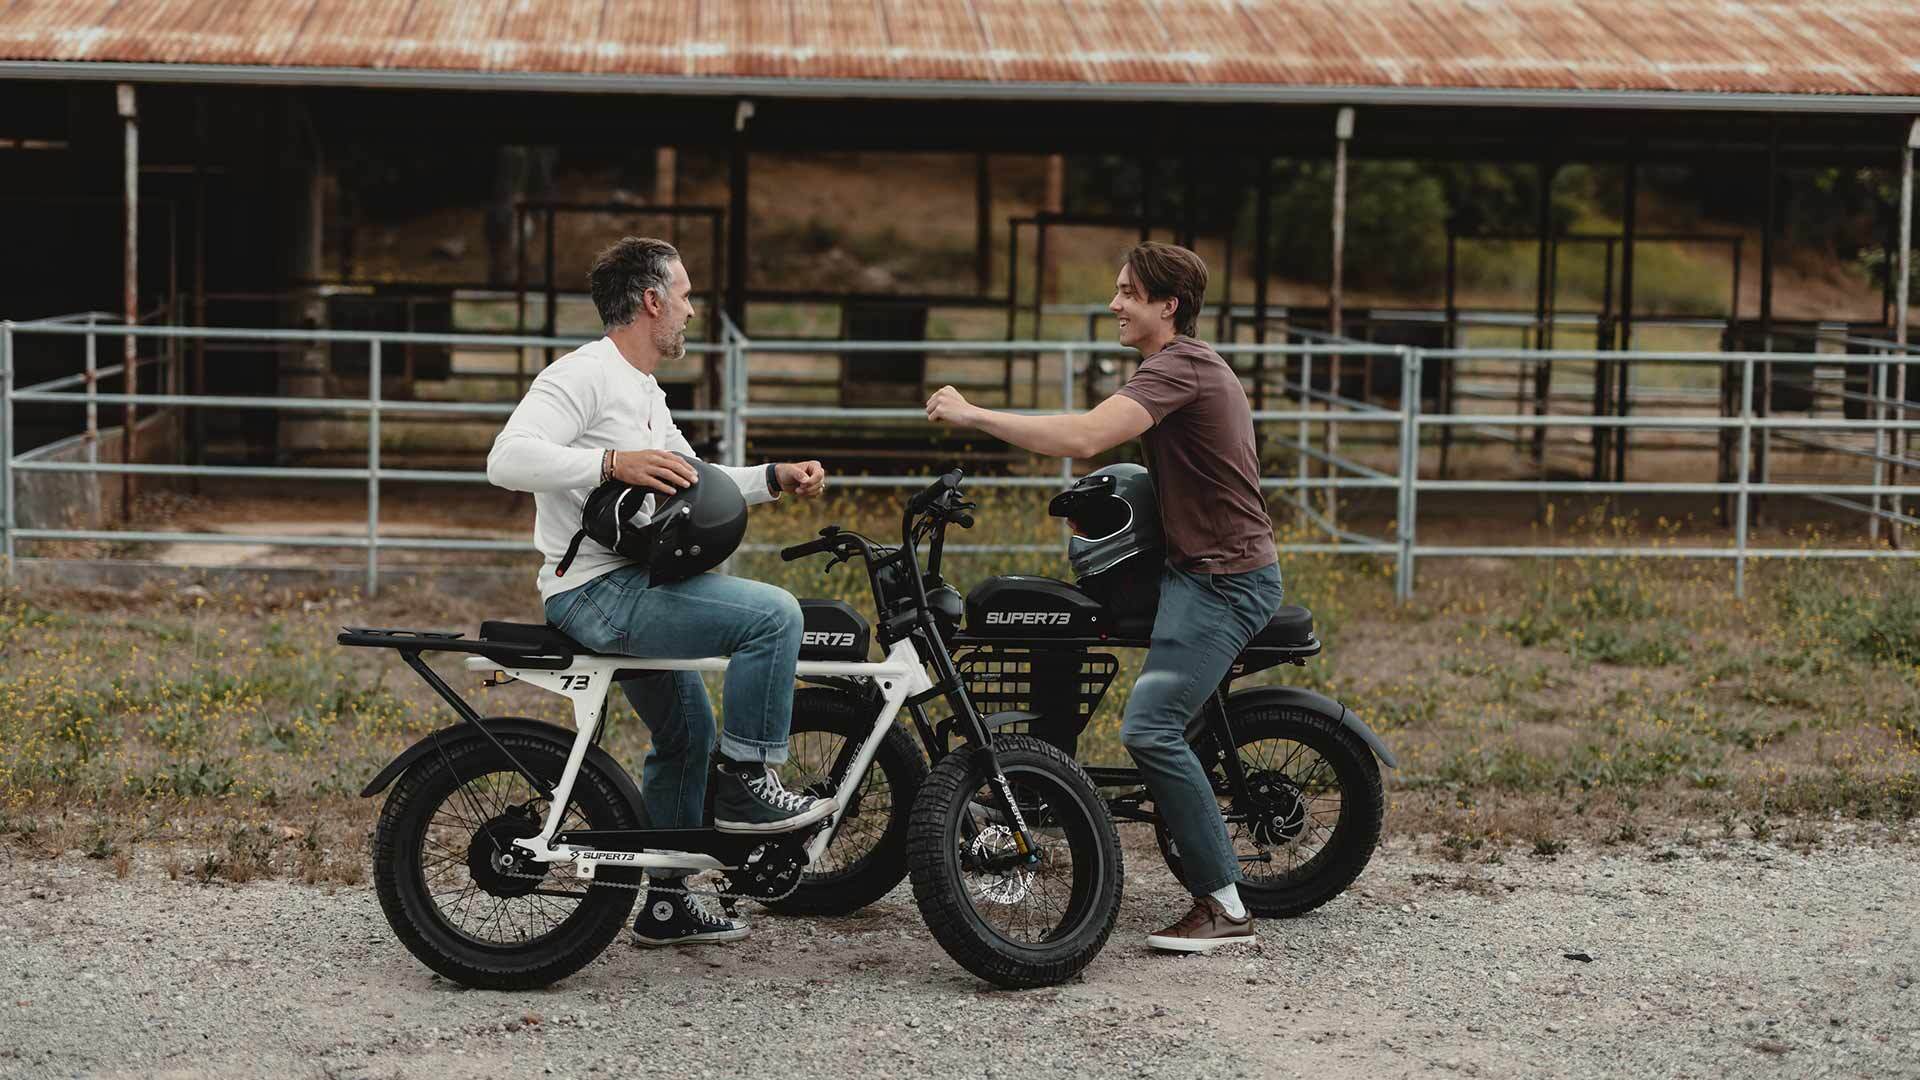 A dad and his son enjoying their SUPER73 ebikes.